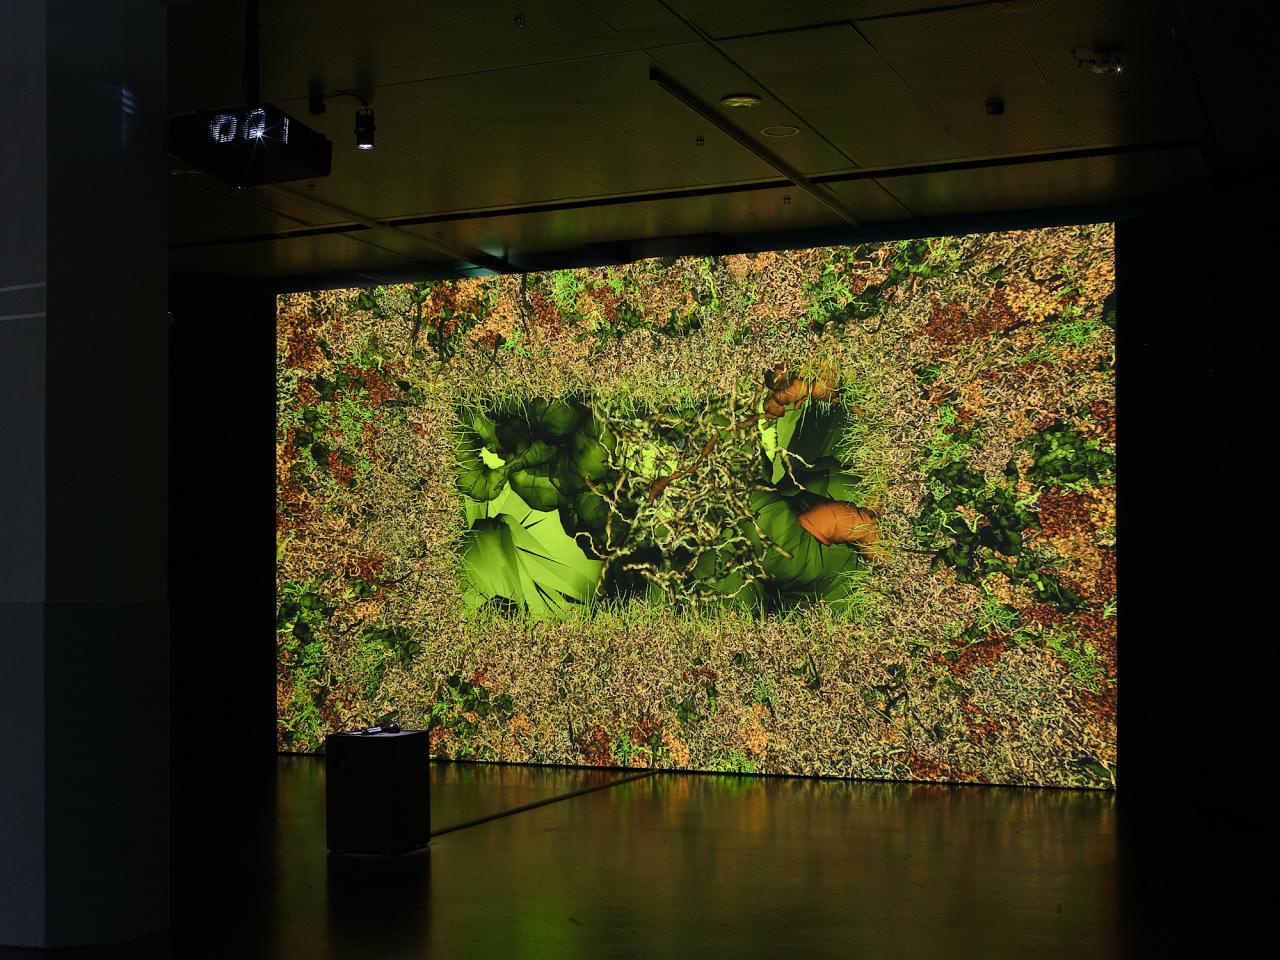 You can see the exhibition view of the work "Phototropy". A large canvas on which plants are shown in different shades of green.